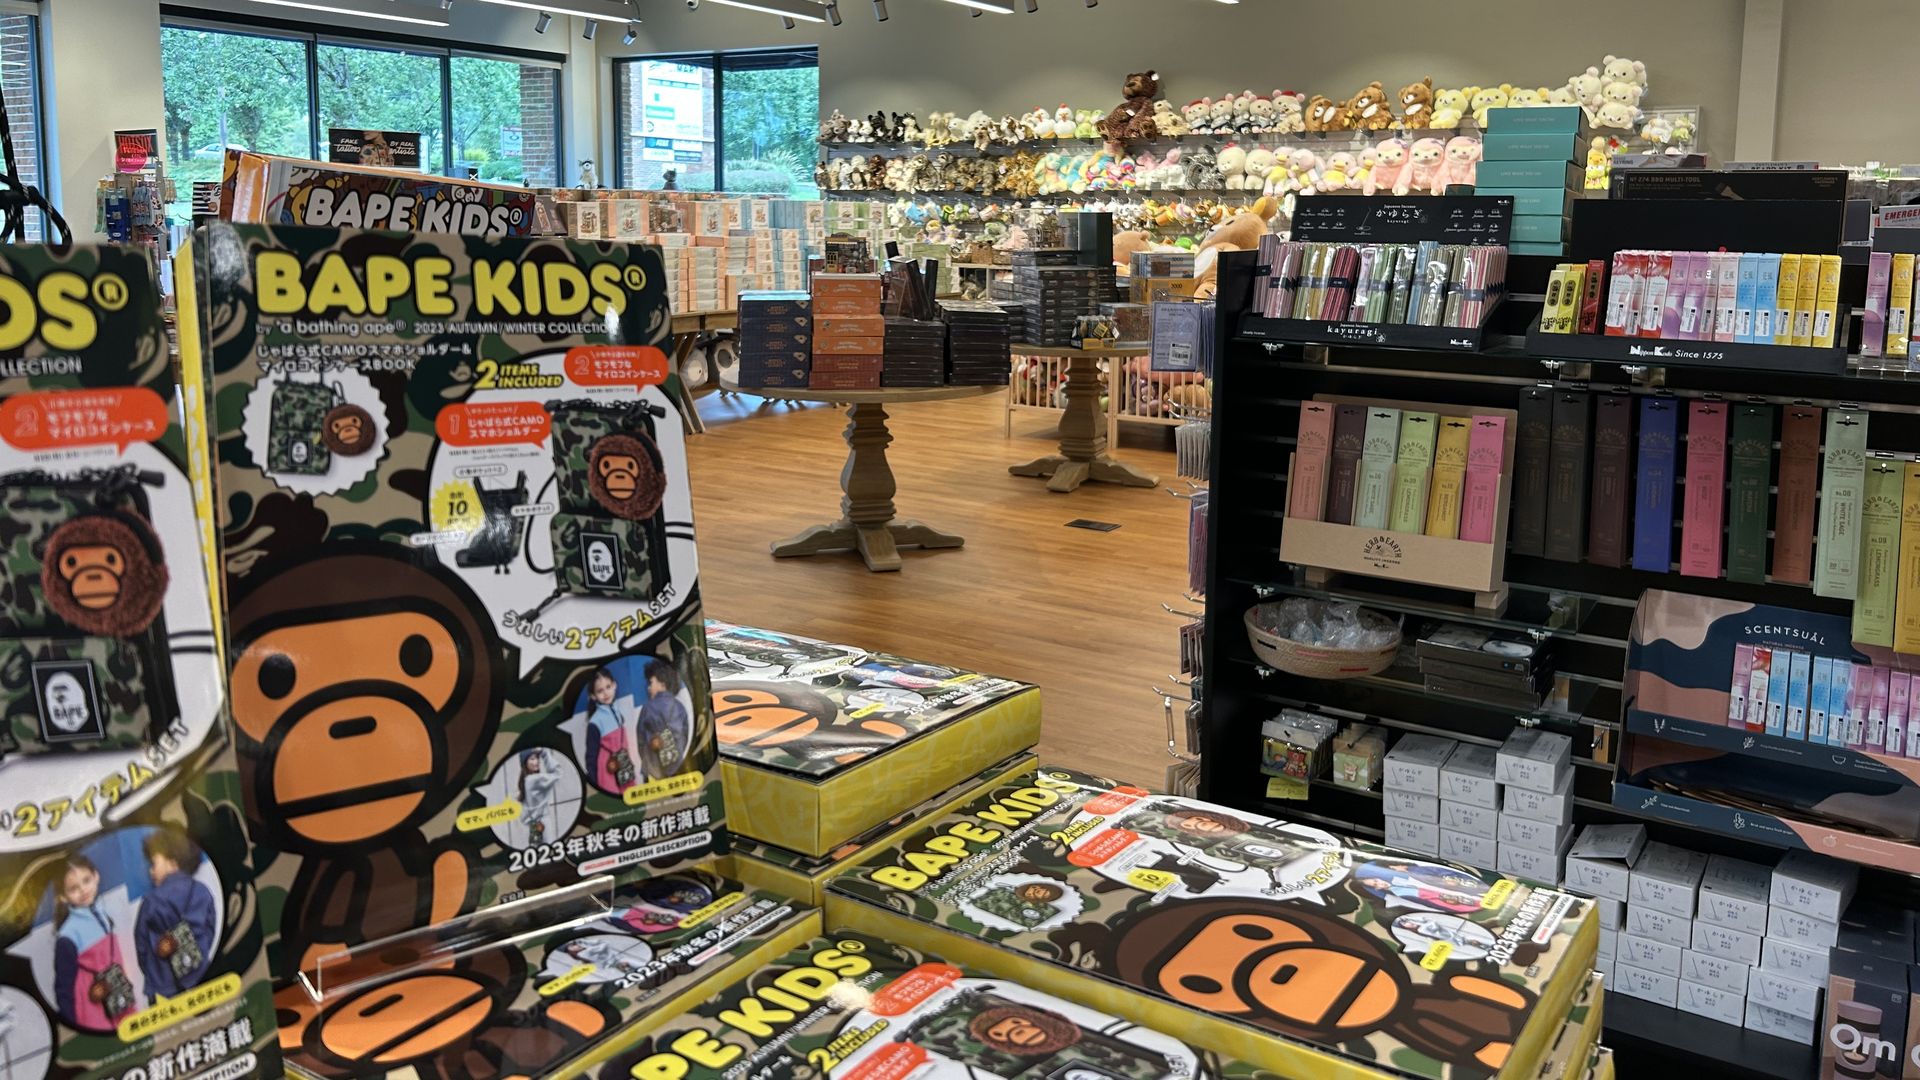 A stack of books on a table reading "Bape Kids" in a store filled with Japanese-designed or -made products